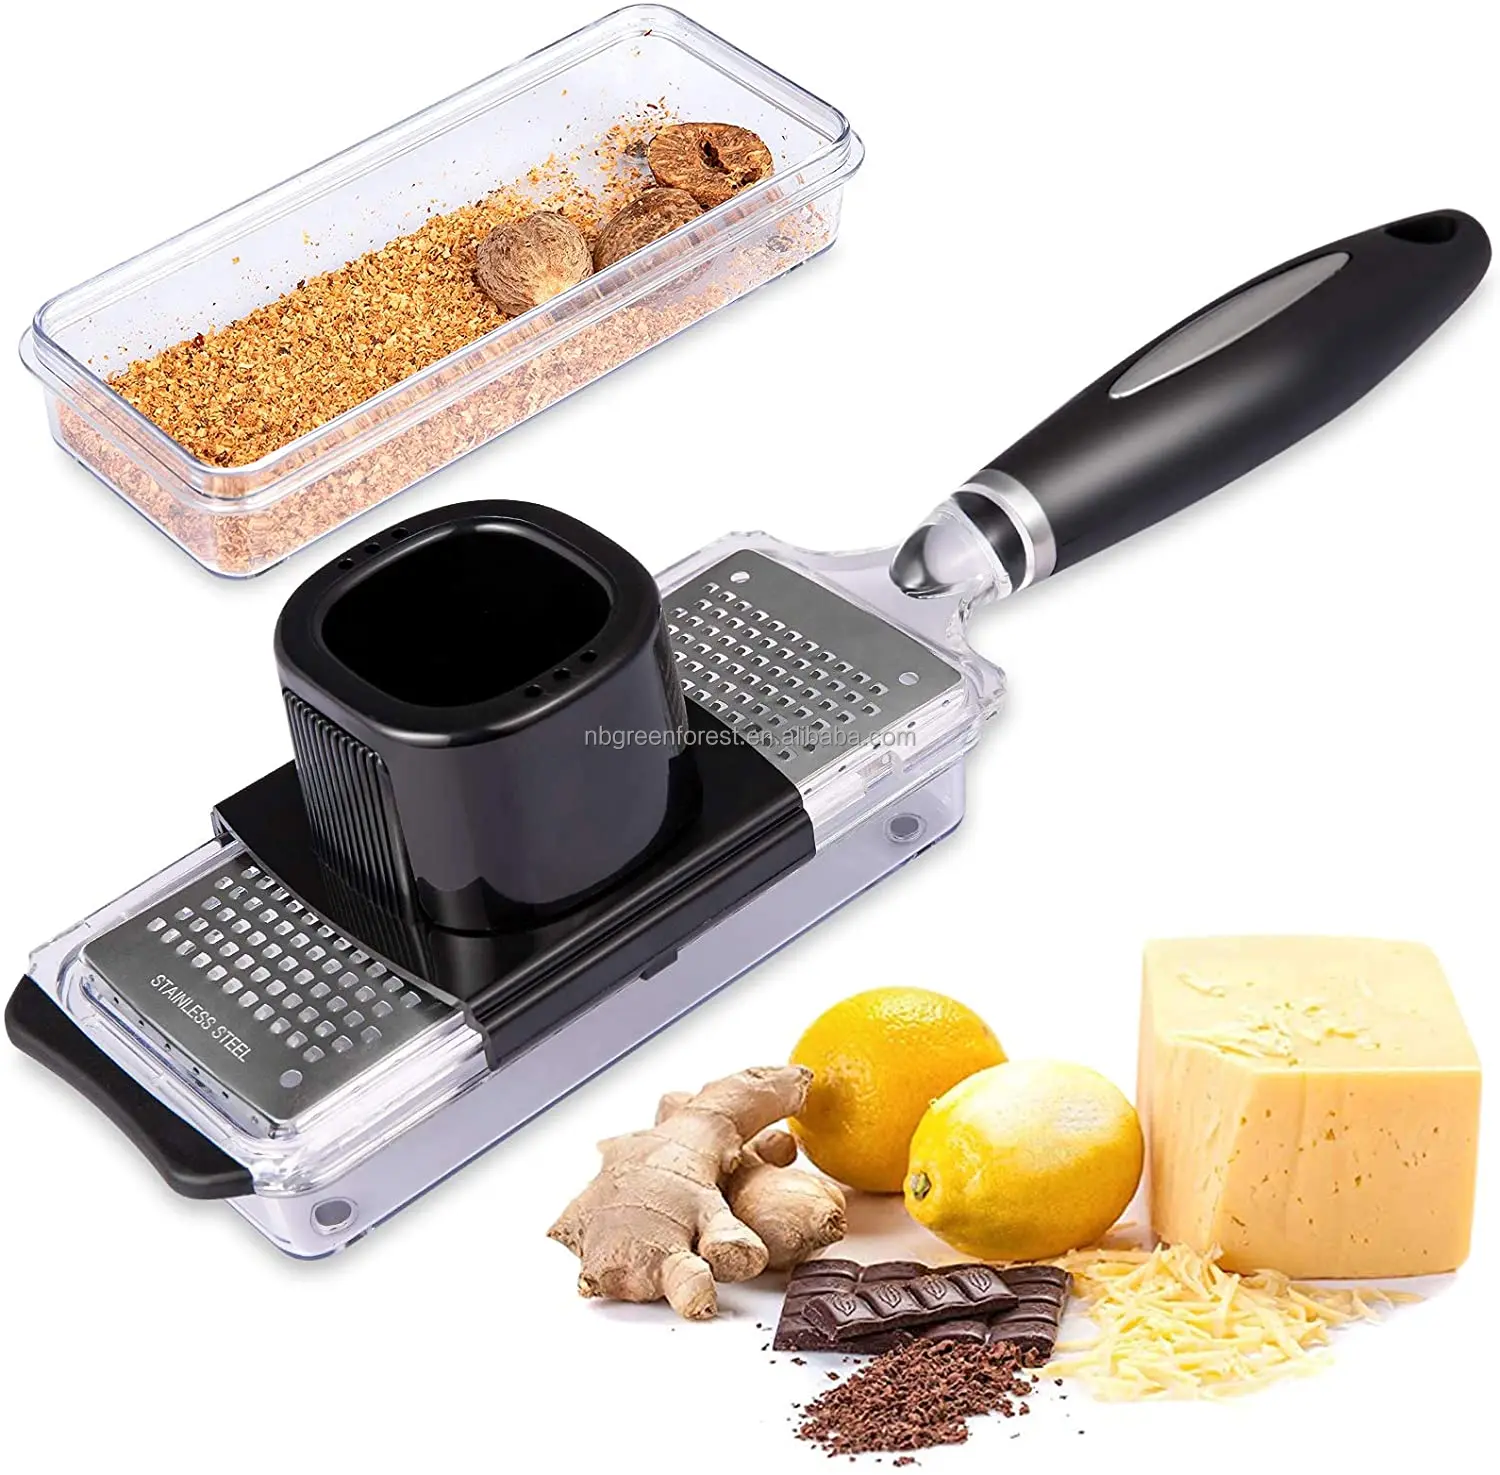 1pc Stainless Steel Cheese Grater & Chocolate & Lemon & Fruit Zester,  Kitchen Tool